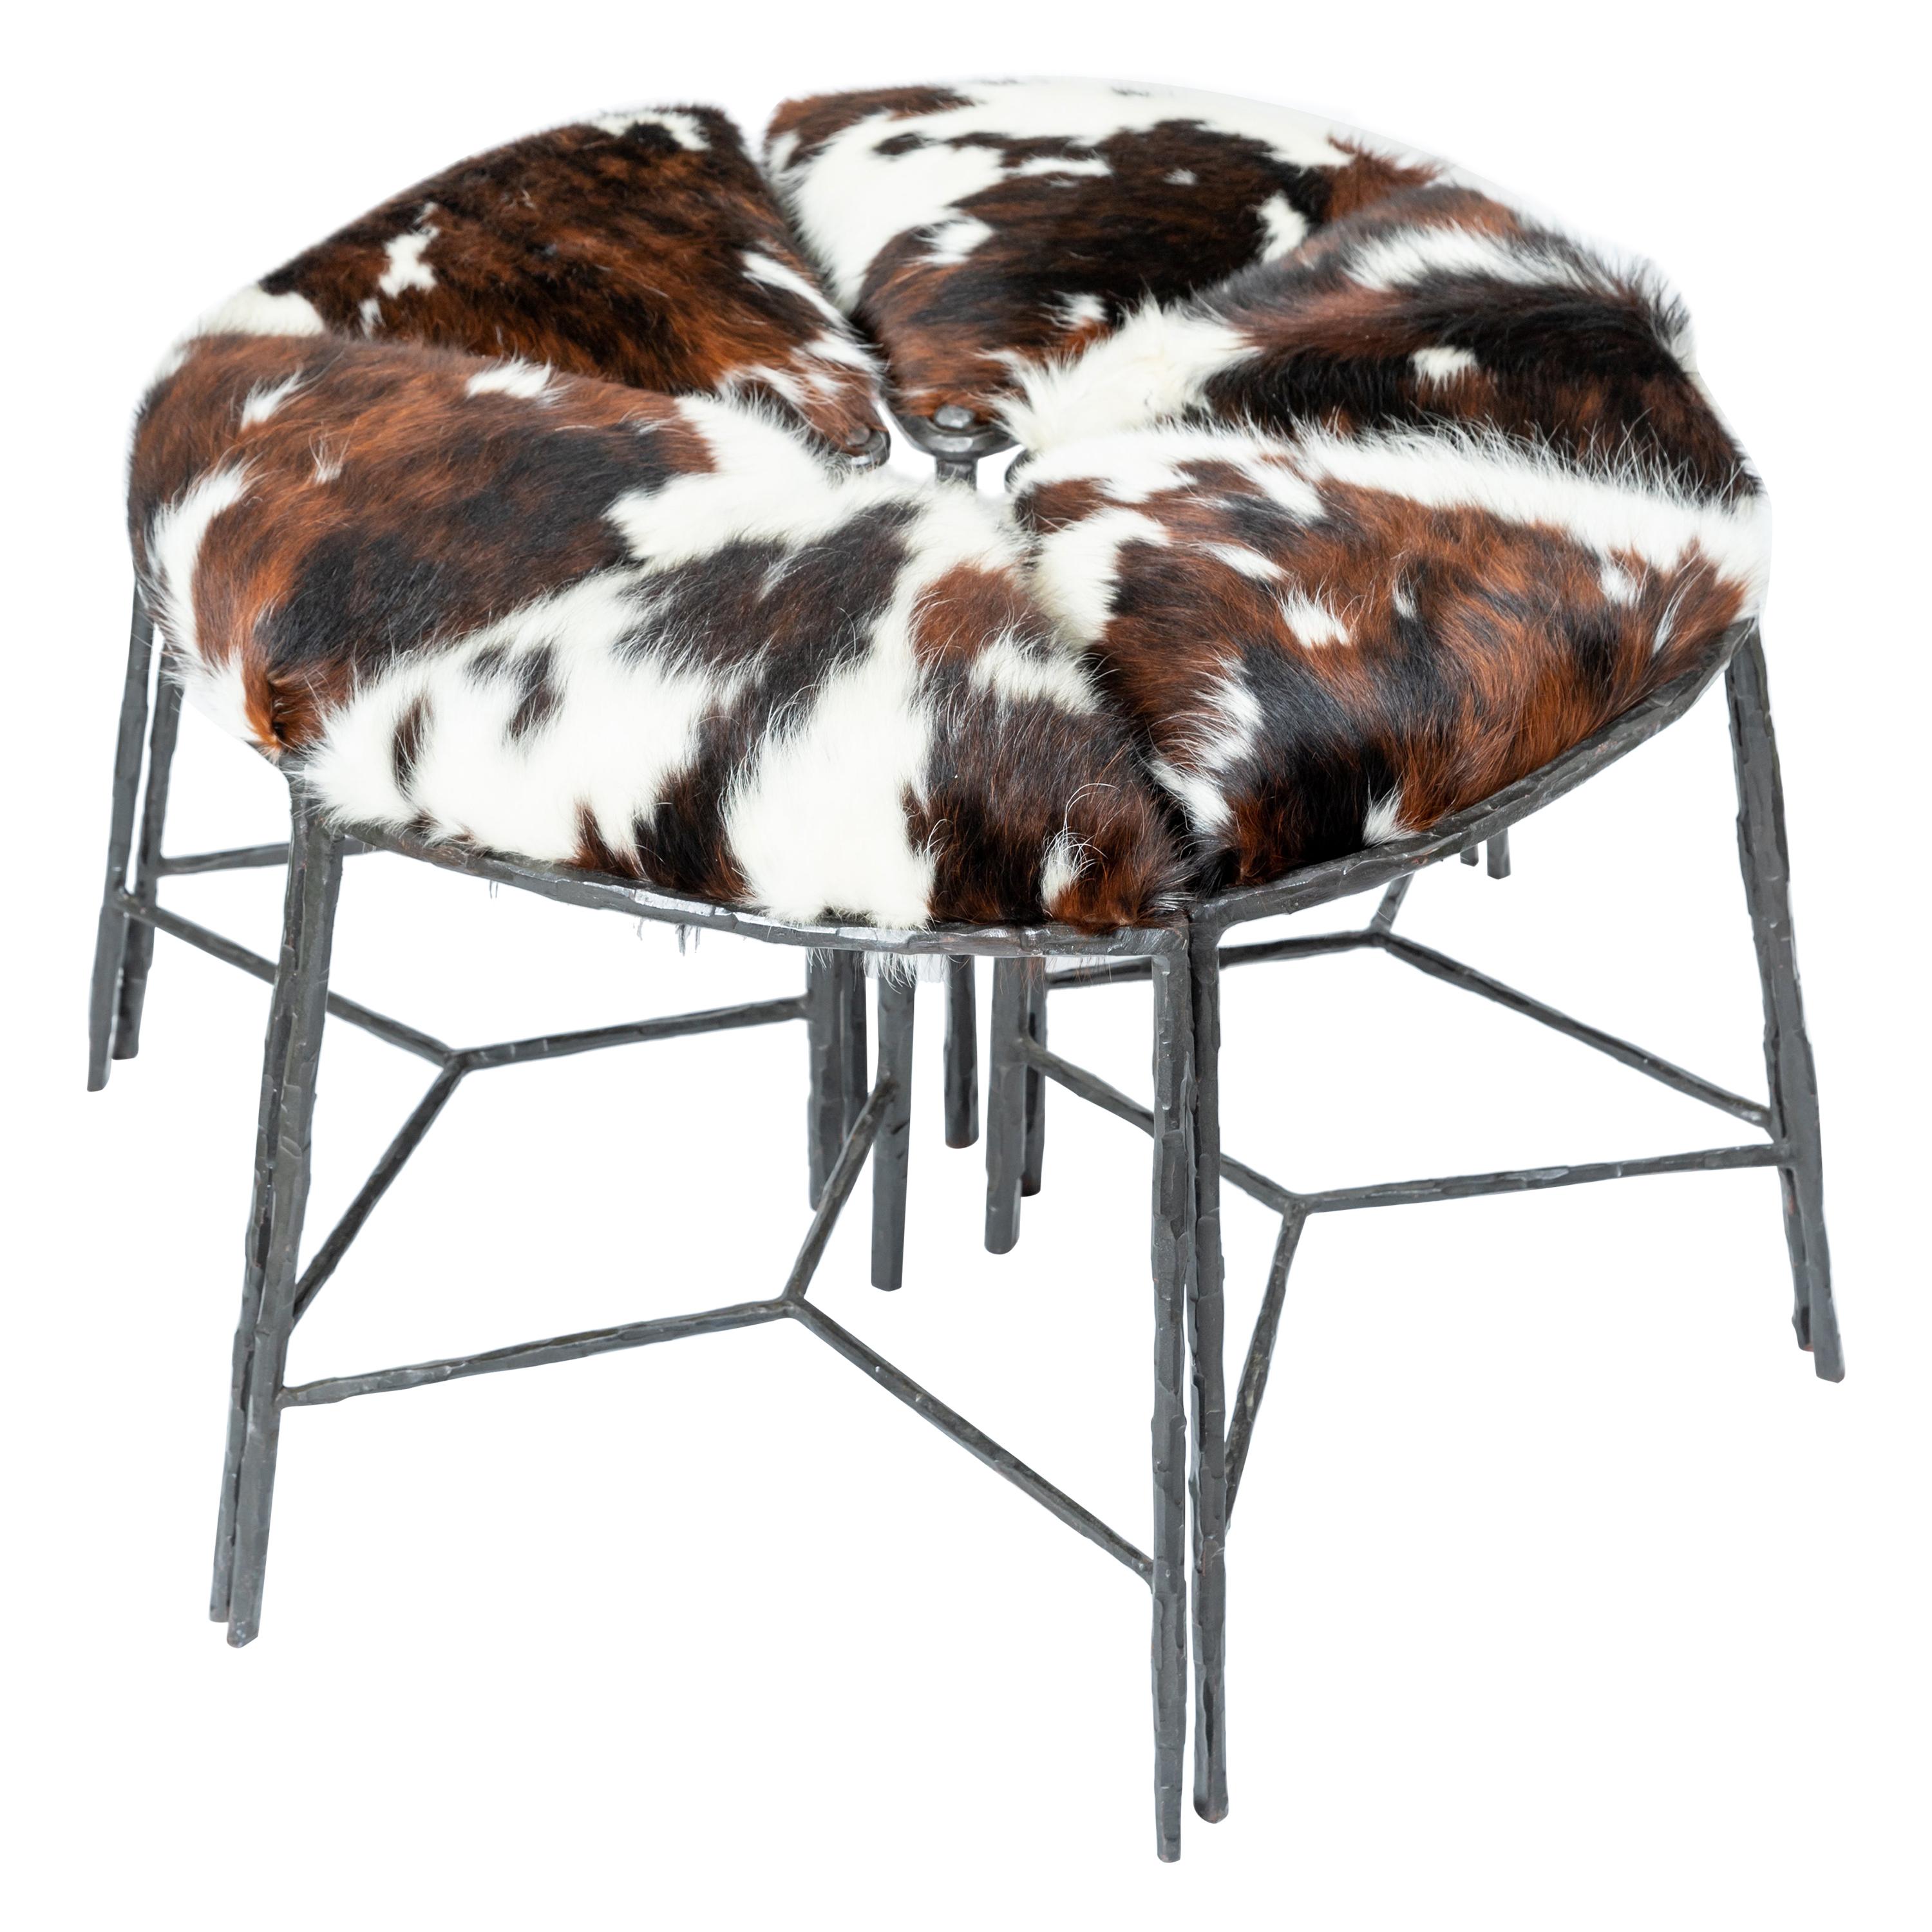 Unusual Cluster of Six Pie Shaped Hide Upholstered Seat & Blackened Iron Benches